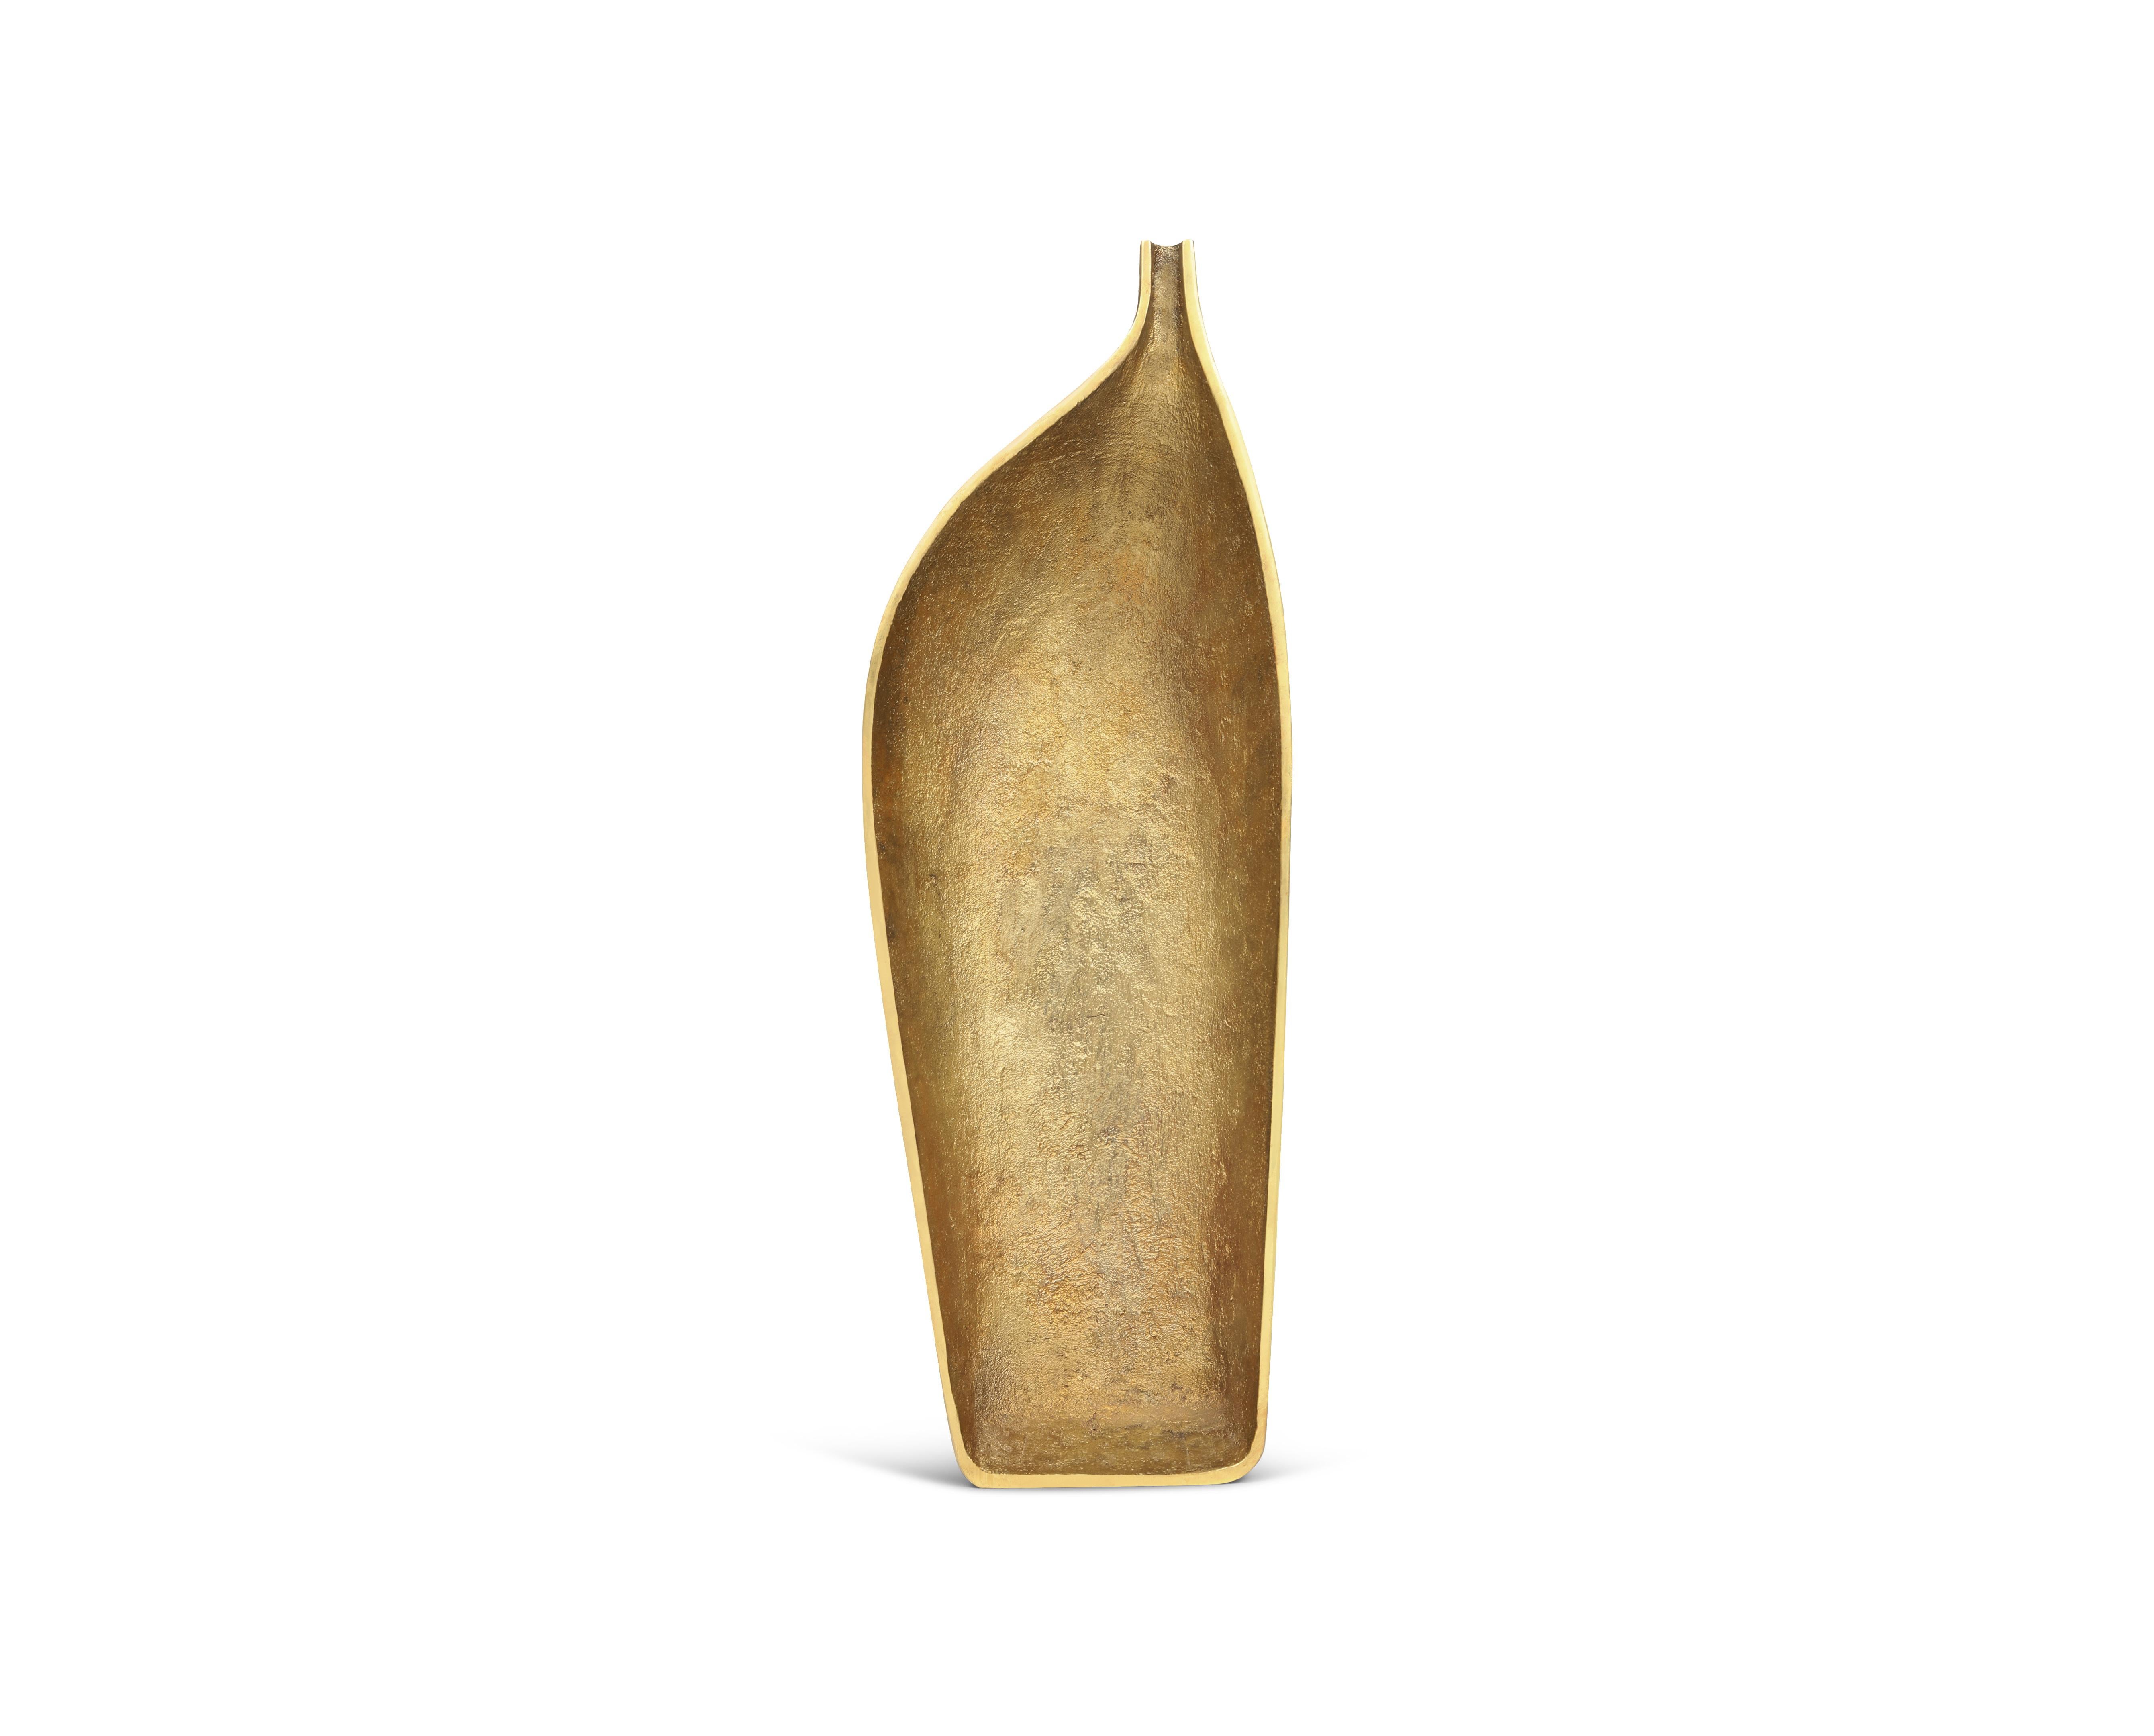 Kinzo Hand Cast Decorative Sculpture by Madheke
Dimensions: W 13.8 x D 8 x H 37.5 cm
Materials: Metal

KINZO’s eye-catching curves and structure are crafted in a shined cast brass with an ultra-polished rim making it the perfect accent piece for